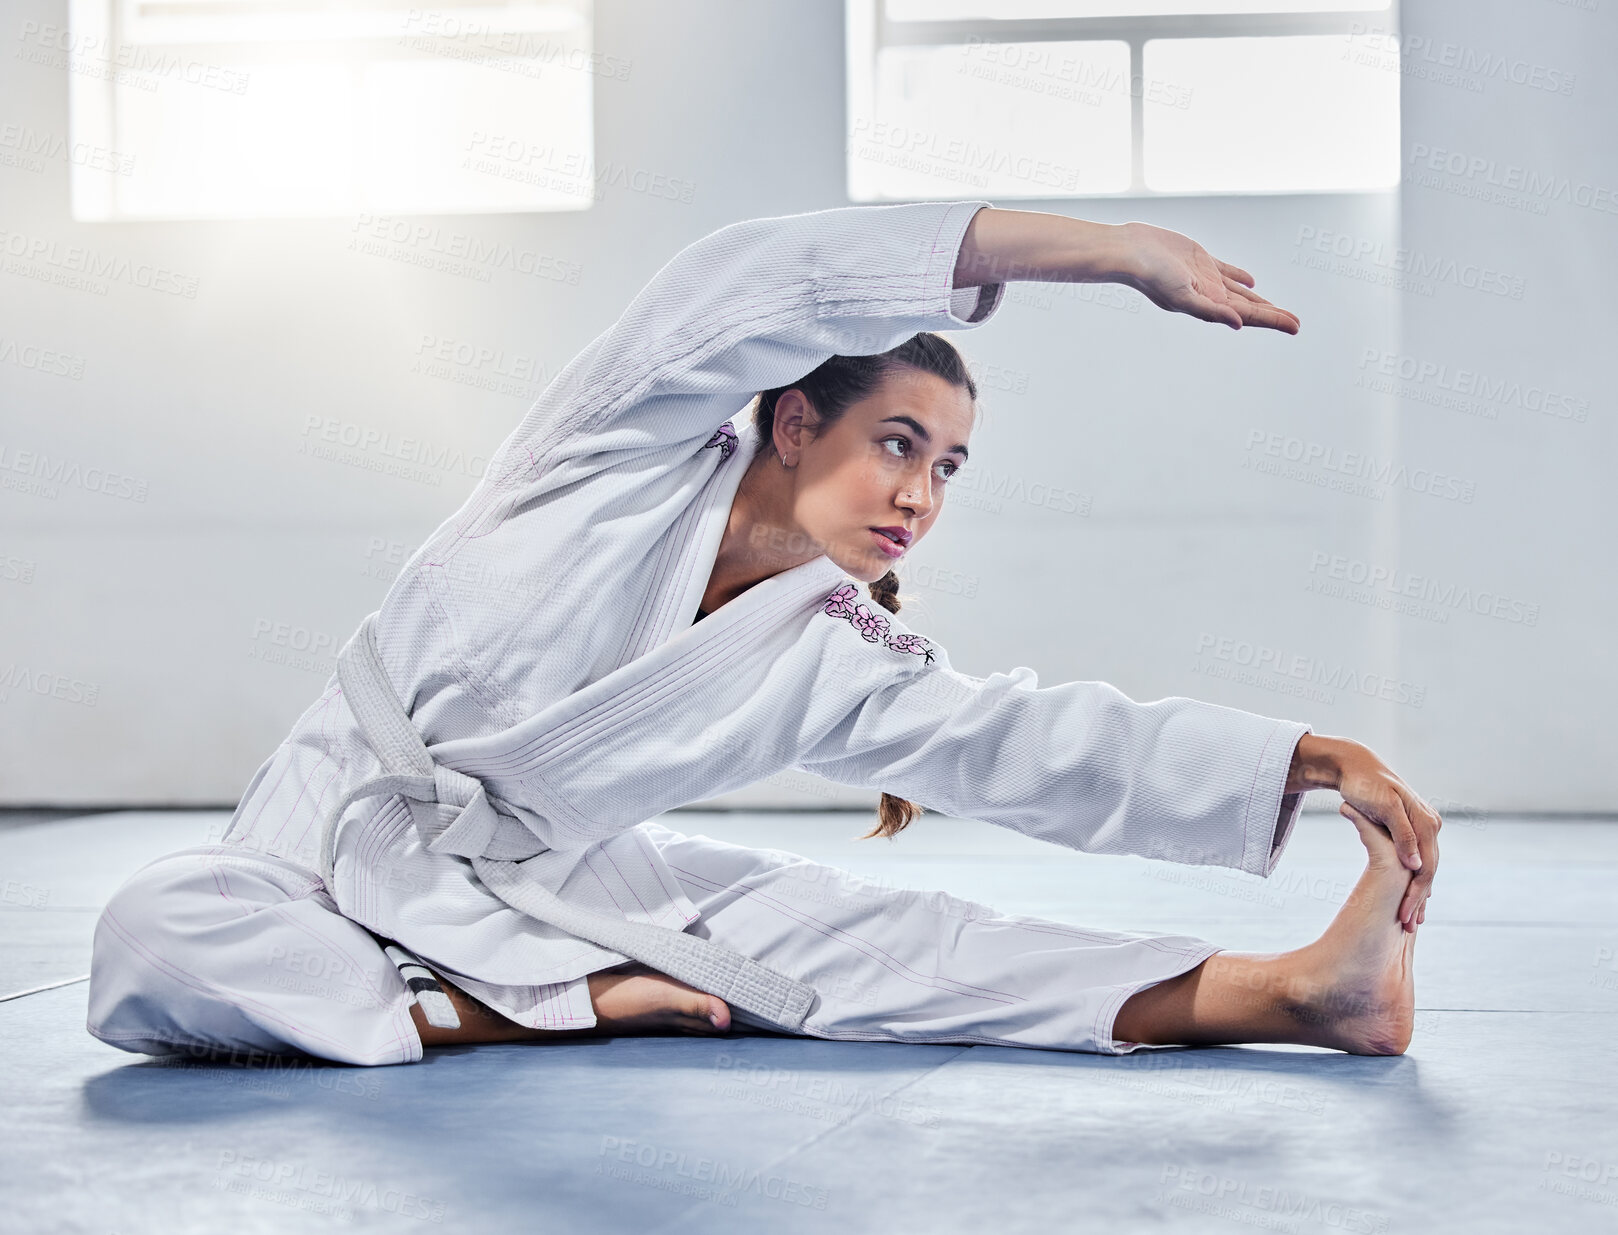 Buy stock photo Martial arts, karate or woman stretching before training practice, fitness workout or challenge competition. Girl, warrior or taekwondo fighter warm up for dojo self defense or safety security lesson